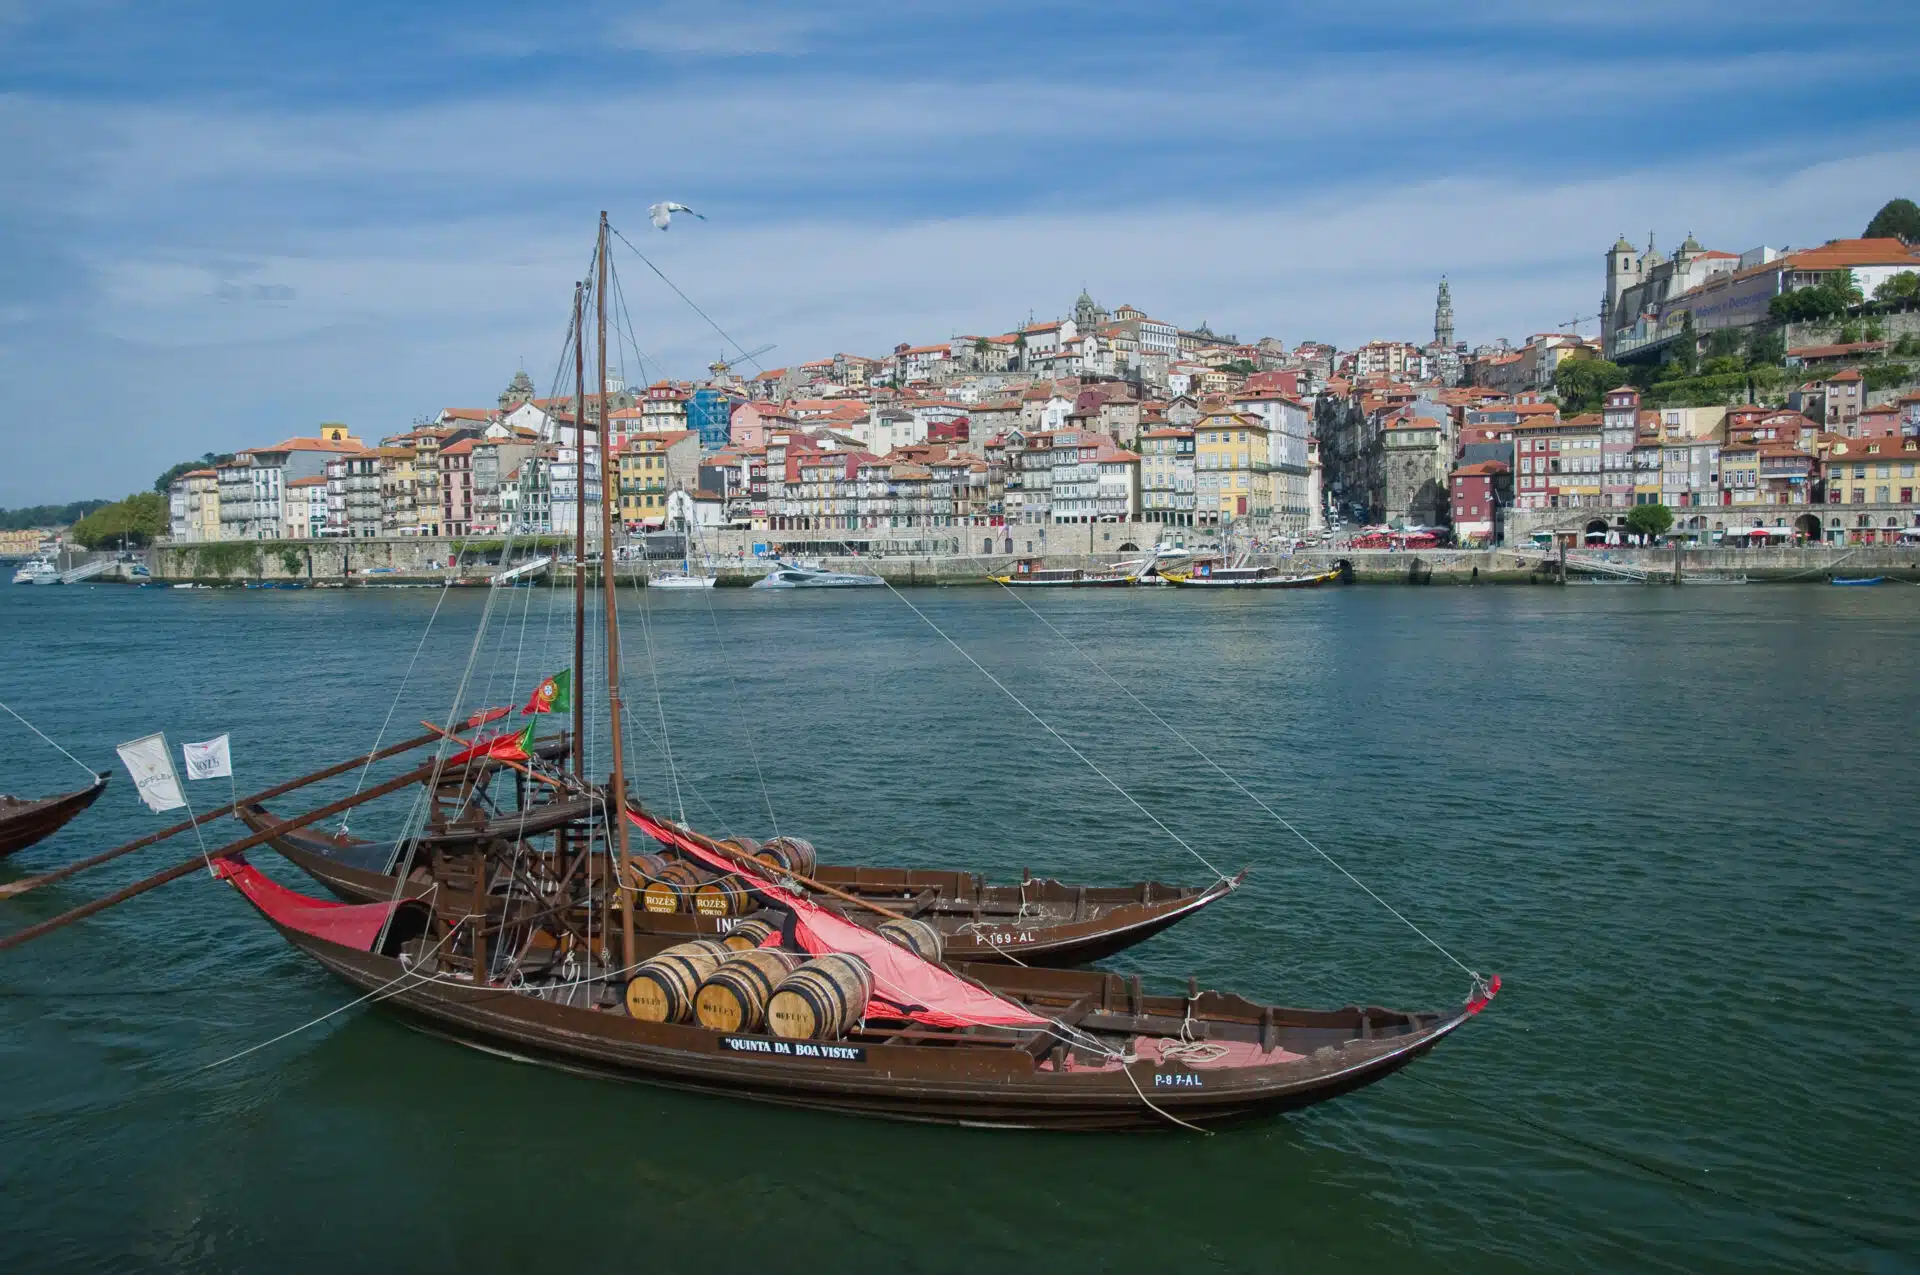 Rabelo boats, also called "sherry boats" on the Douro River at the Ribeira do Porto waterfront across from Oporto, Portugal. | Location: Porto, Portugal.